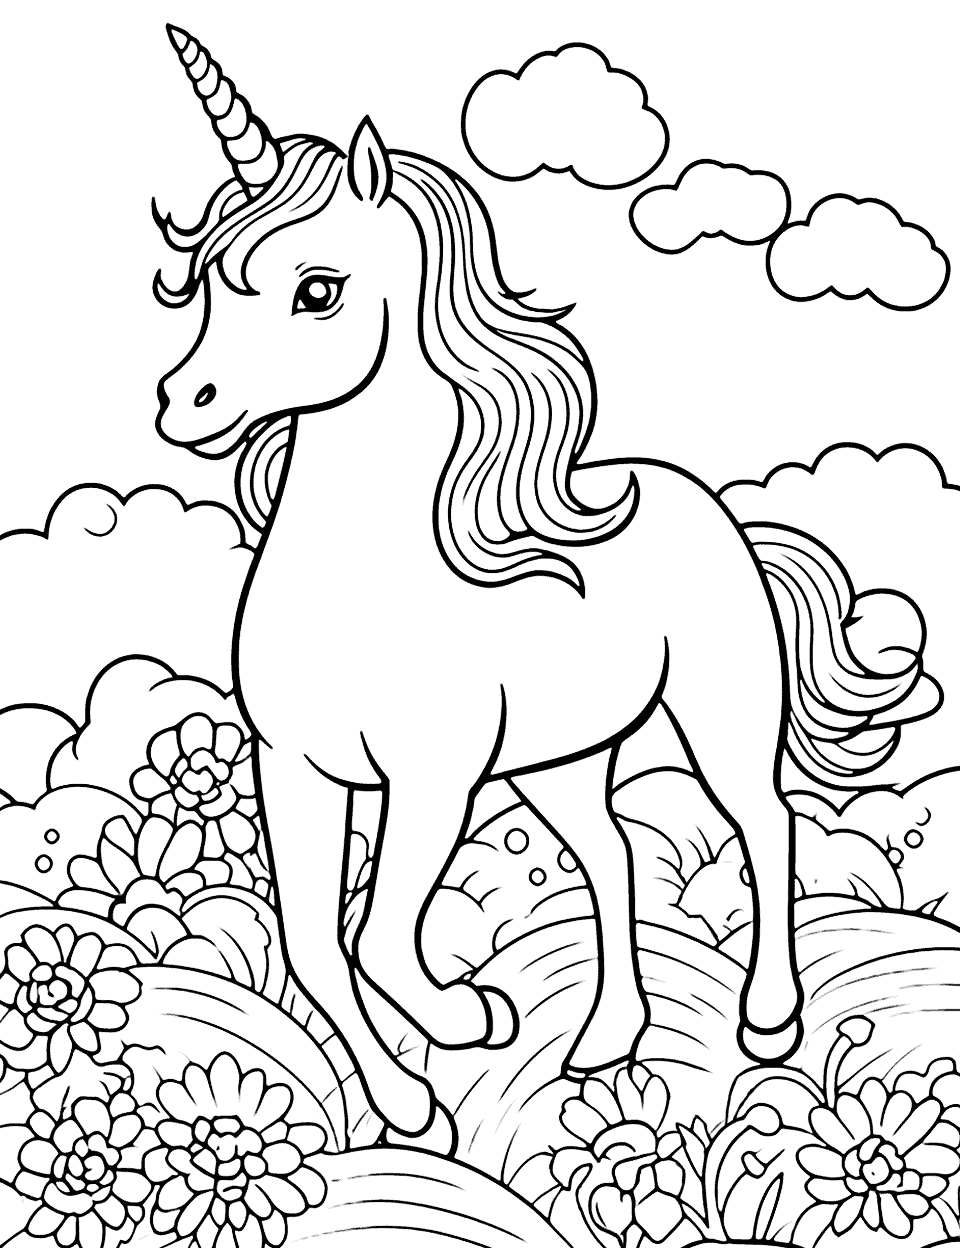 Unicorn's Magical Summer Coloring Page - A mystical unicorn prancing around in a field of flowers under the summer sun.